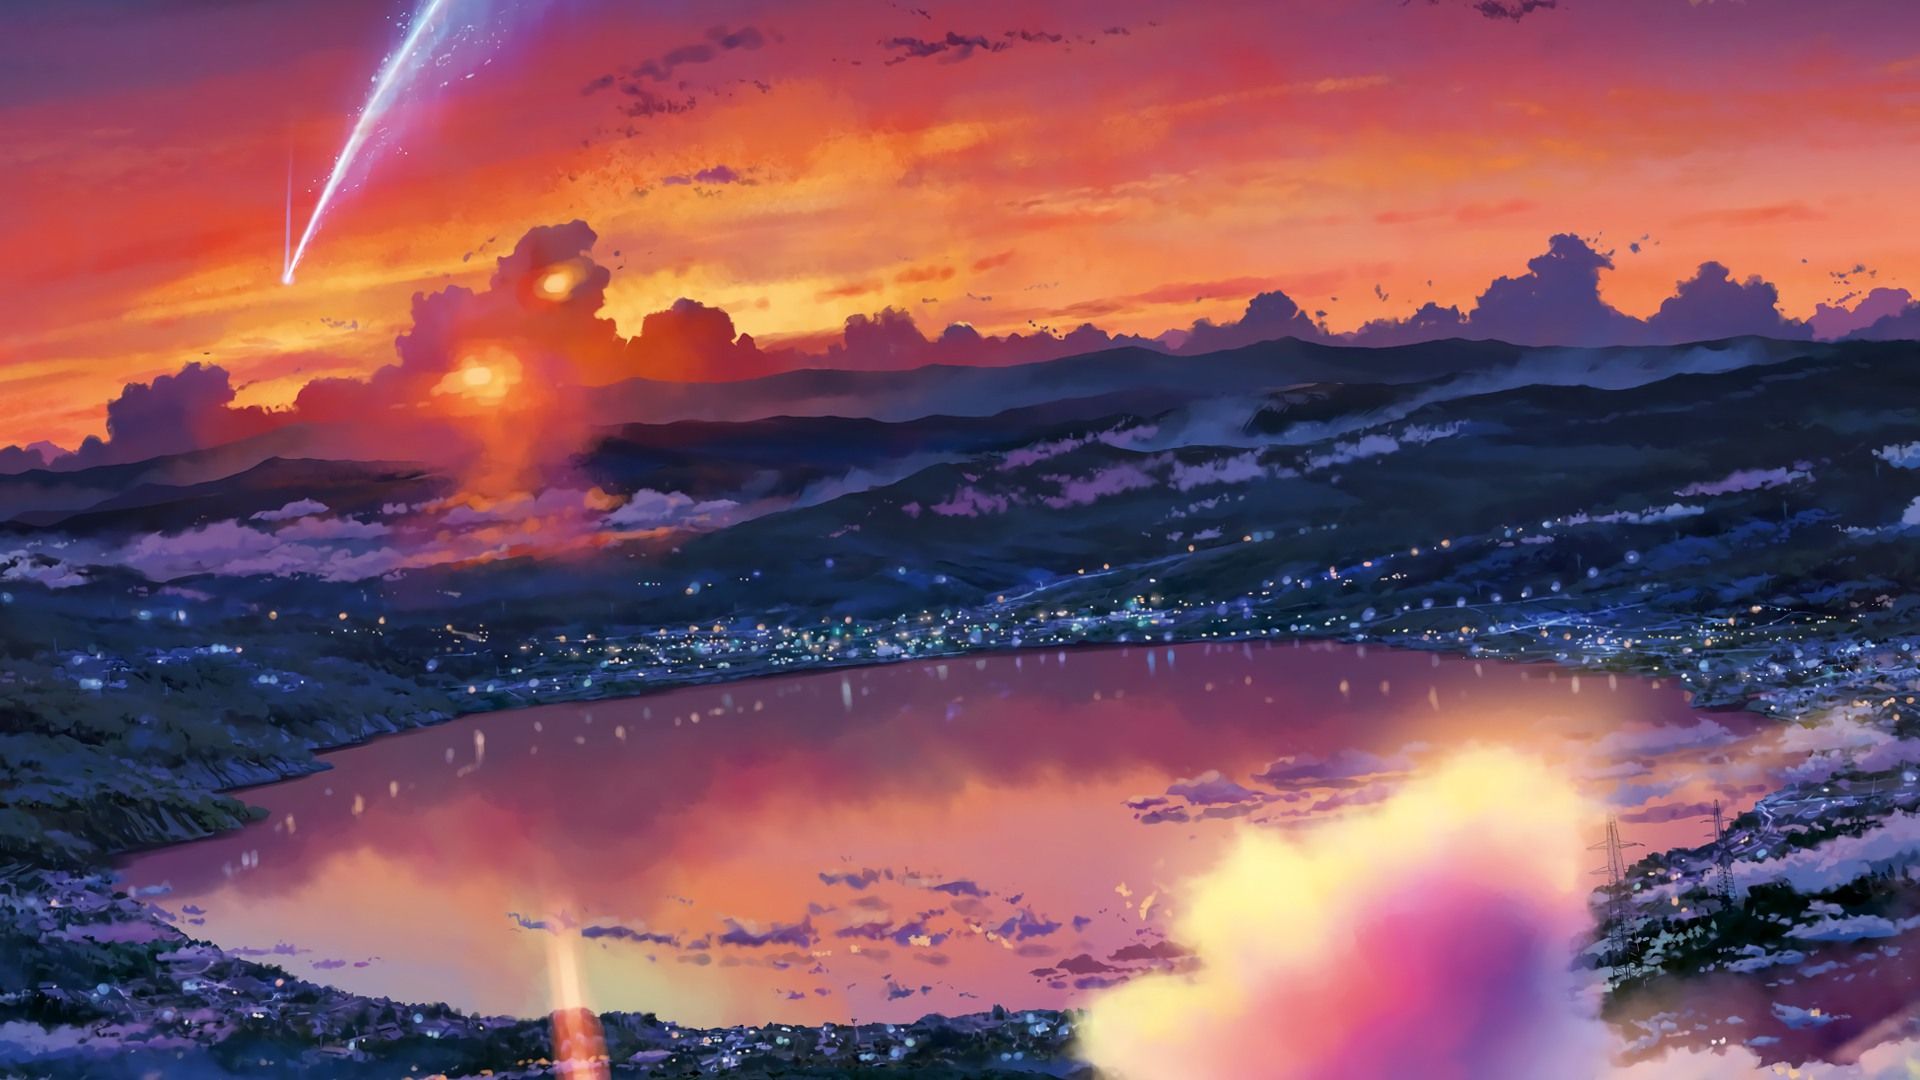 Your Name. Anime Scenery Art Comet Sunrise Clouds. Your